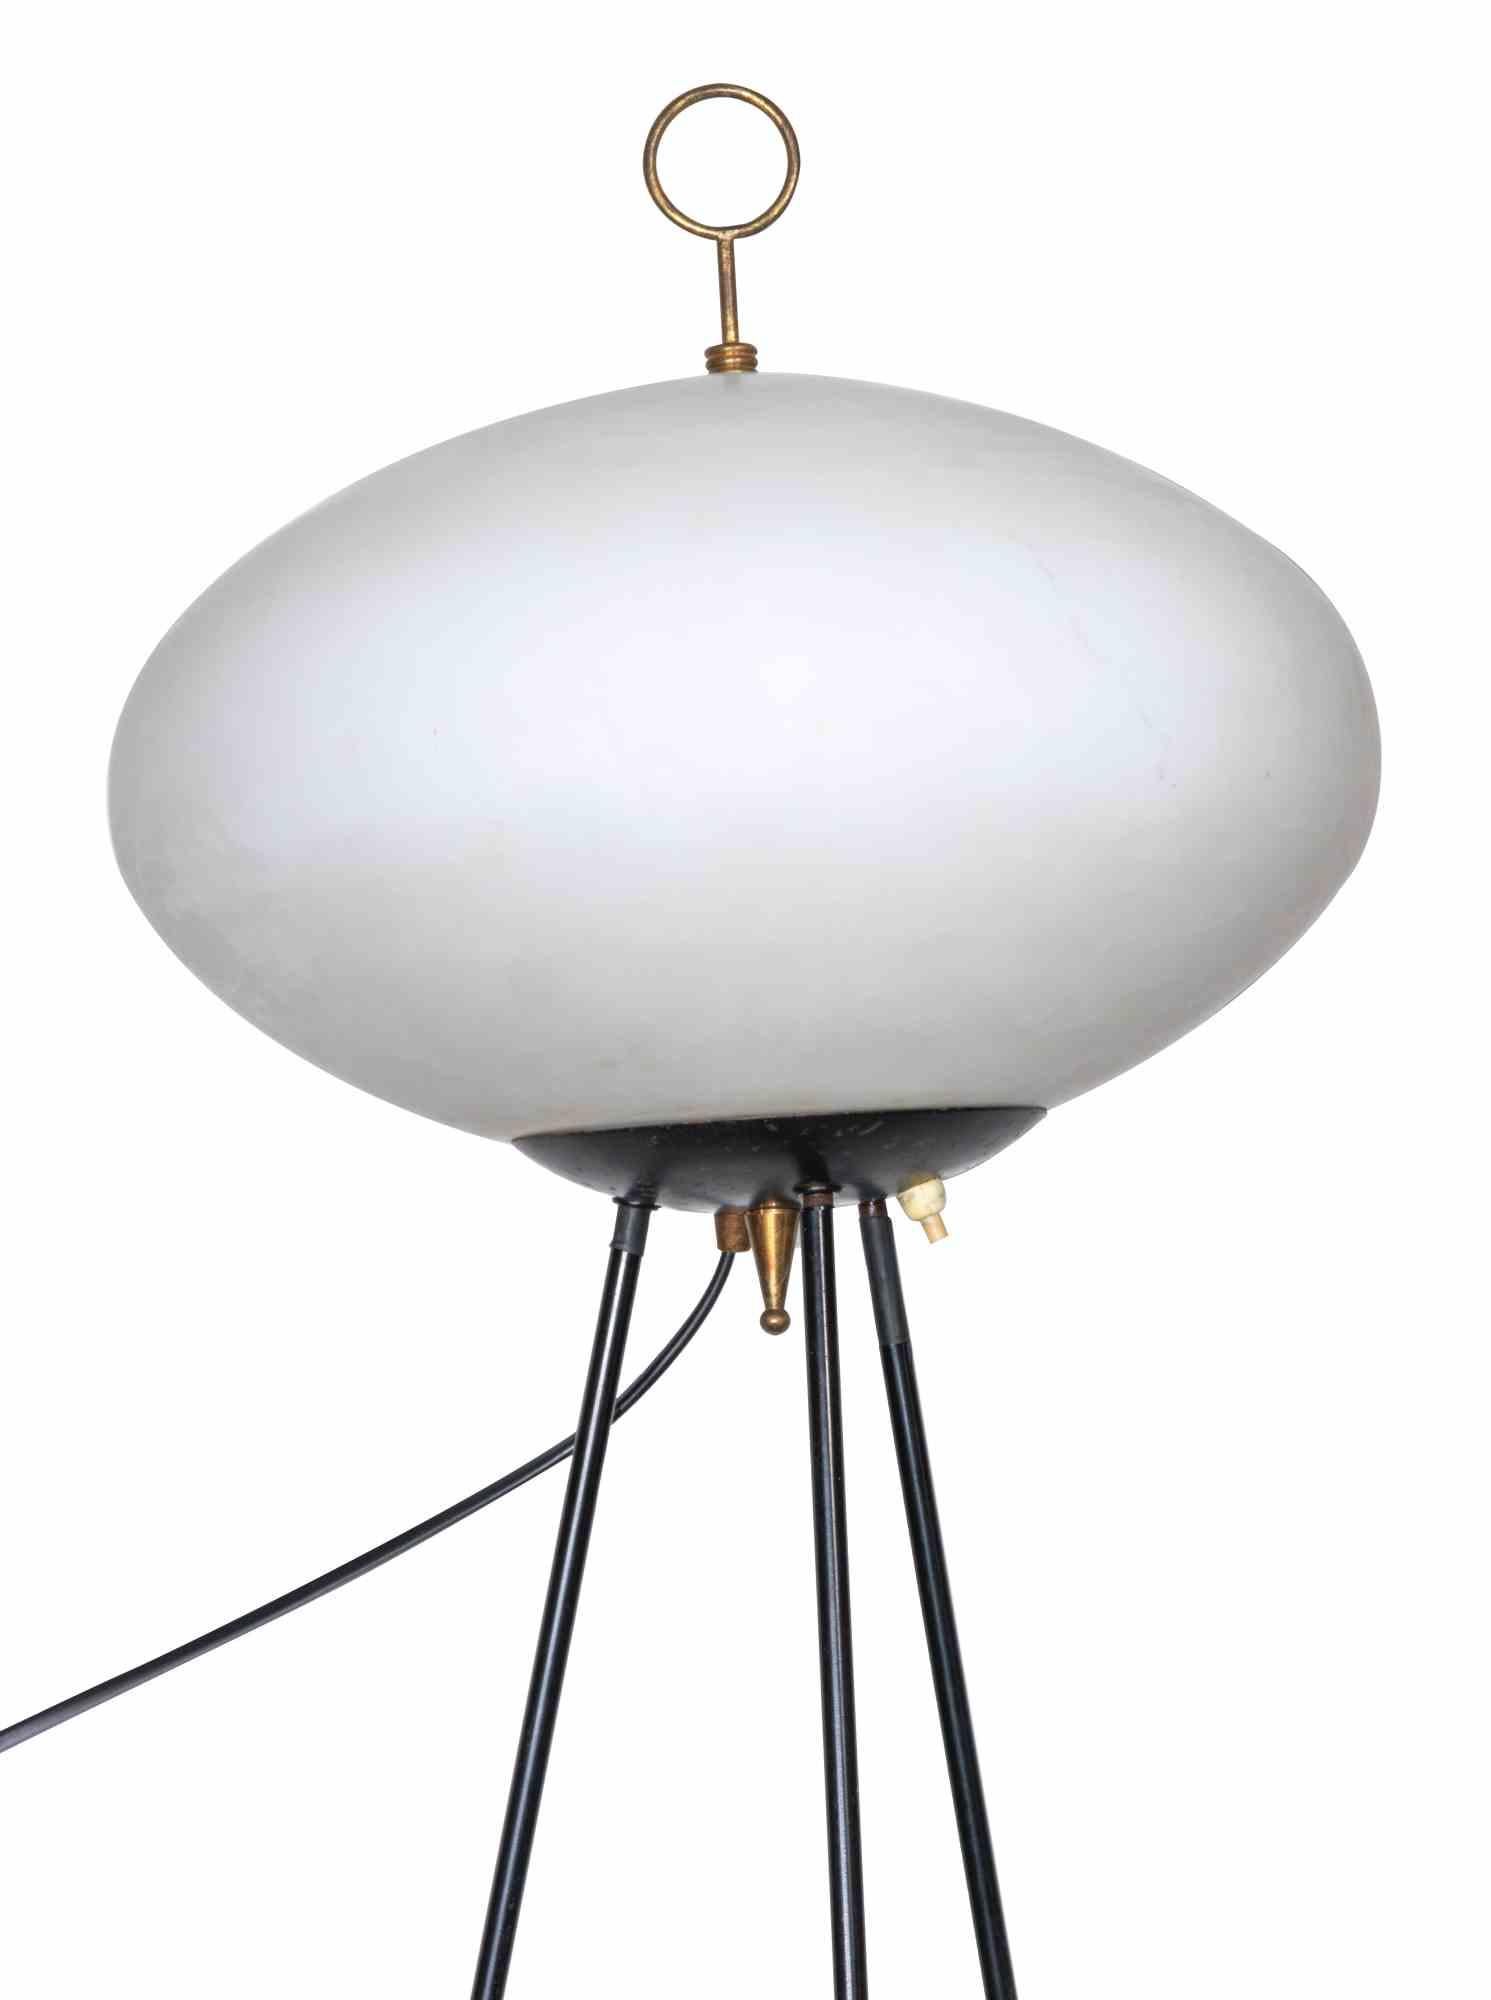 Stilnovo floor lamp is an original designed lamp attributed to Stilnovo in the 1970s.

Floor lamp with tripod base in painted metal and brass with opal glass diffuser.